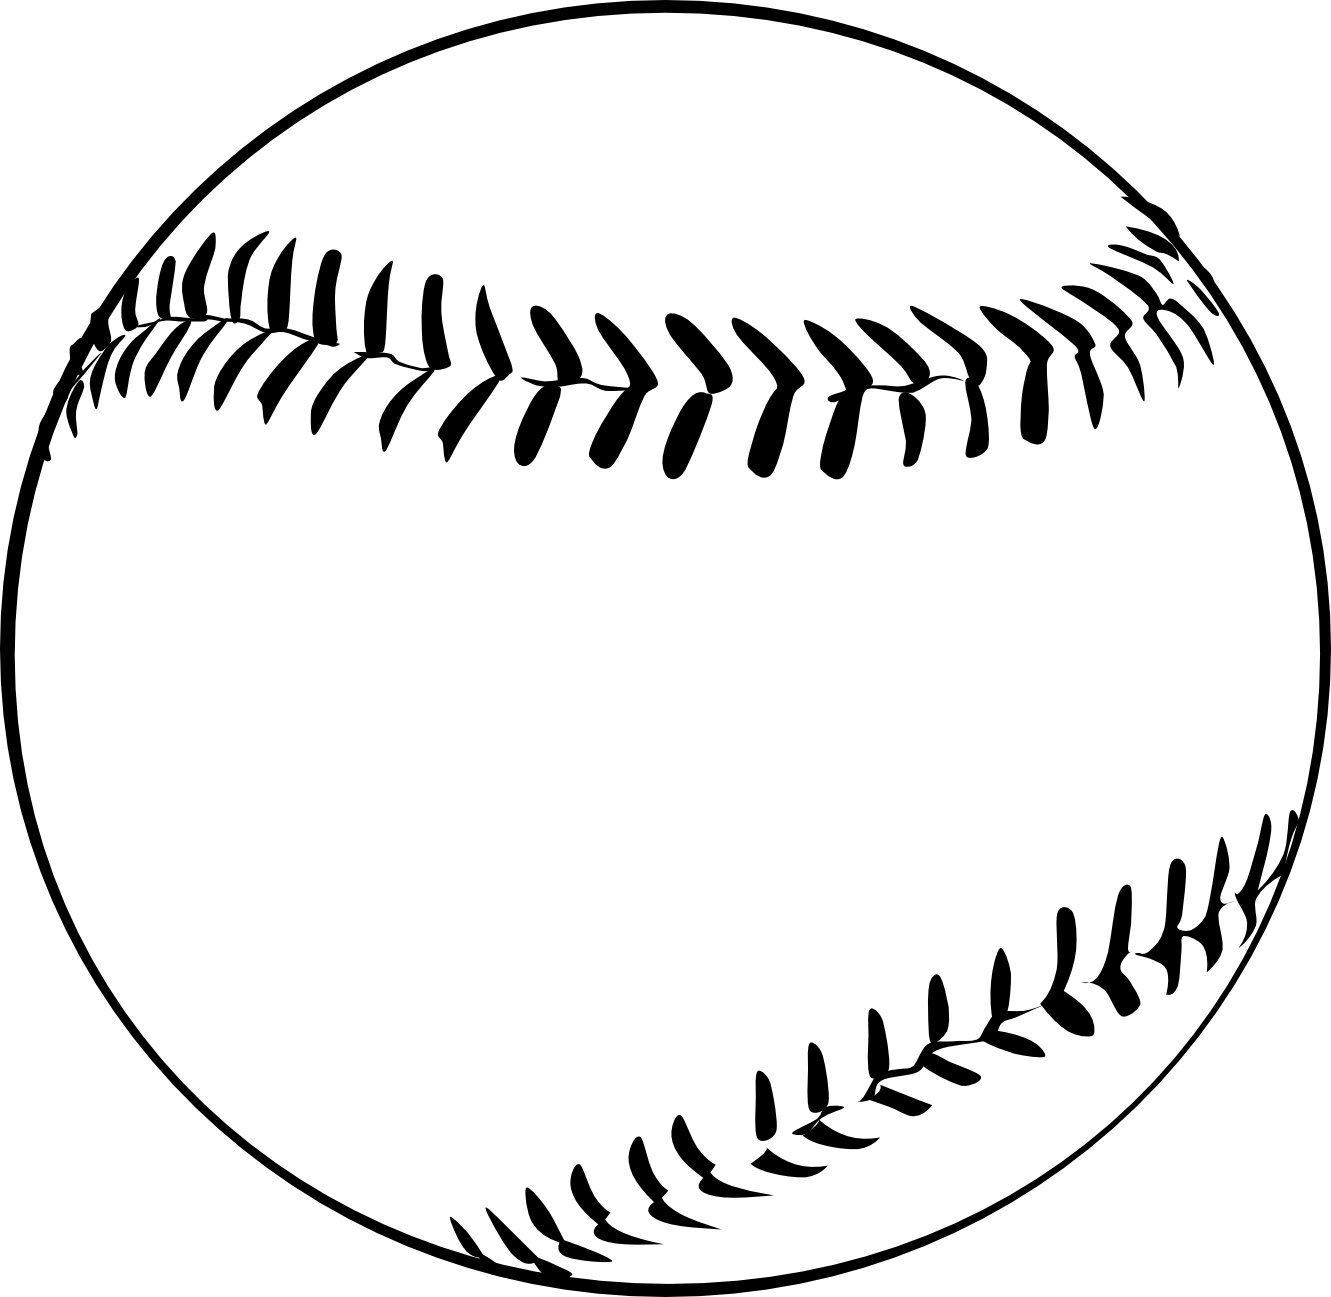 Baseball clipart black and white free images 5